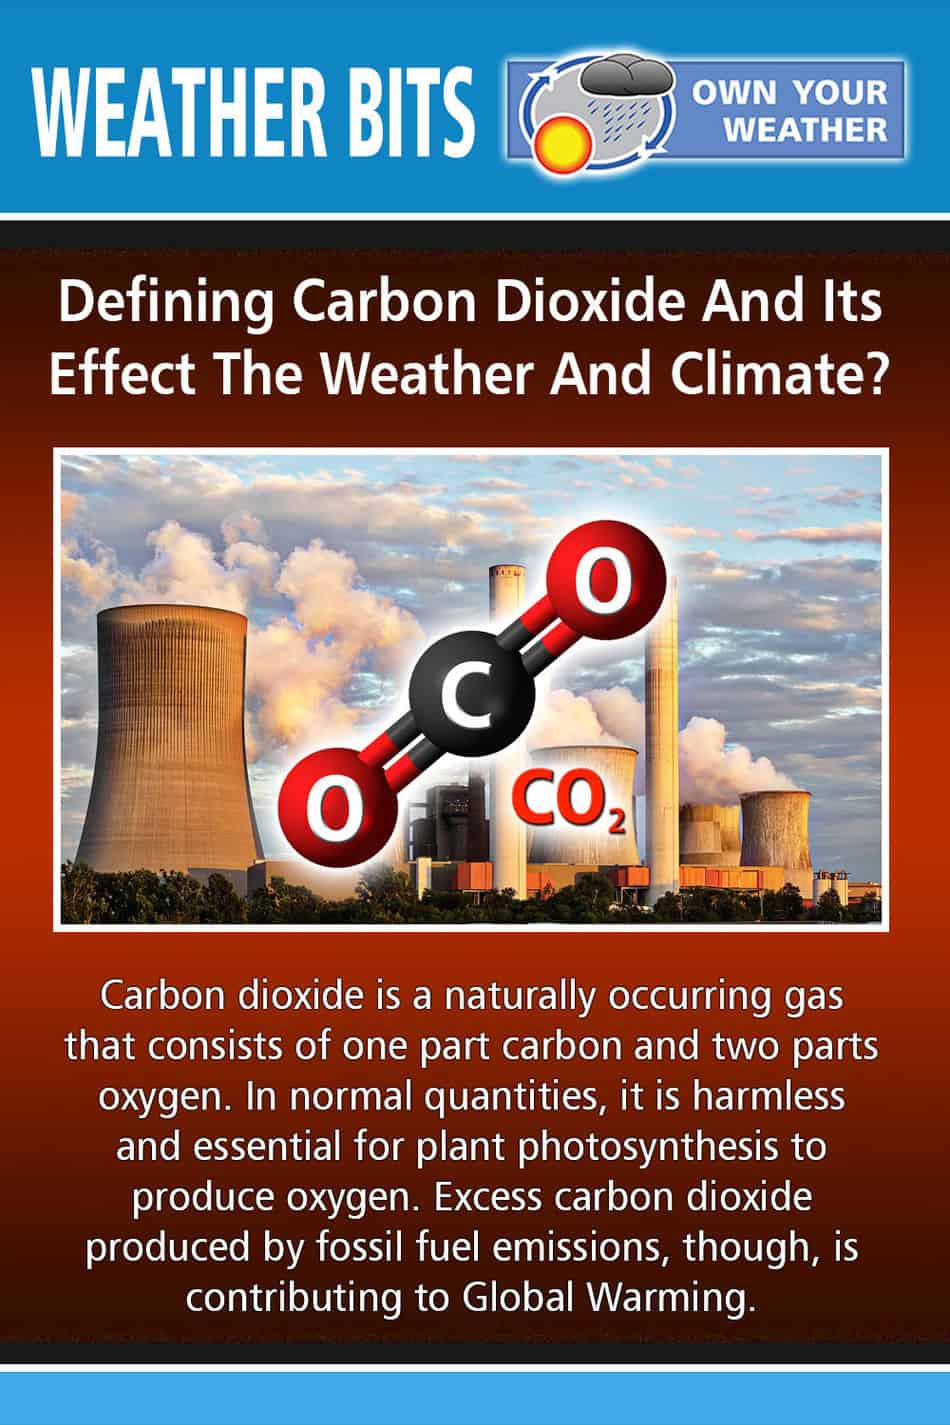 Defining Carbon Dioxide And Its Effect On The Weather & Climate